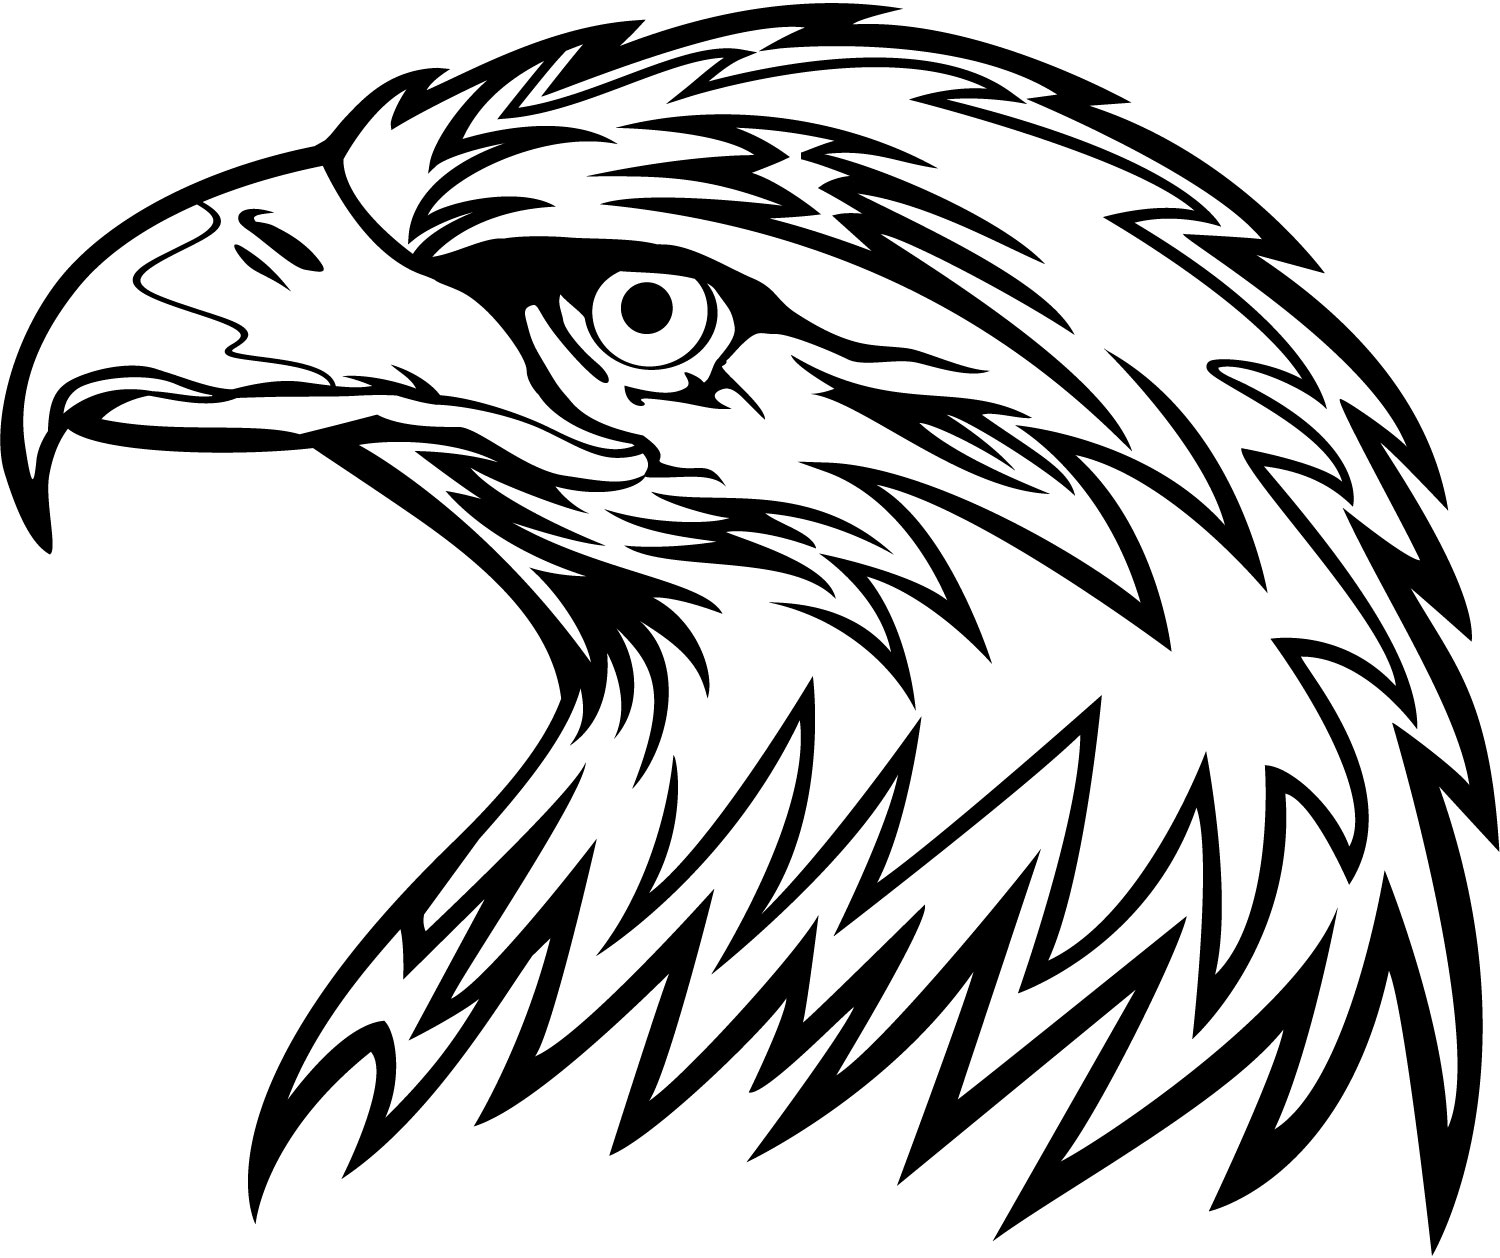 Images For > American Eagle Outline